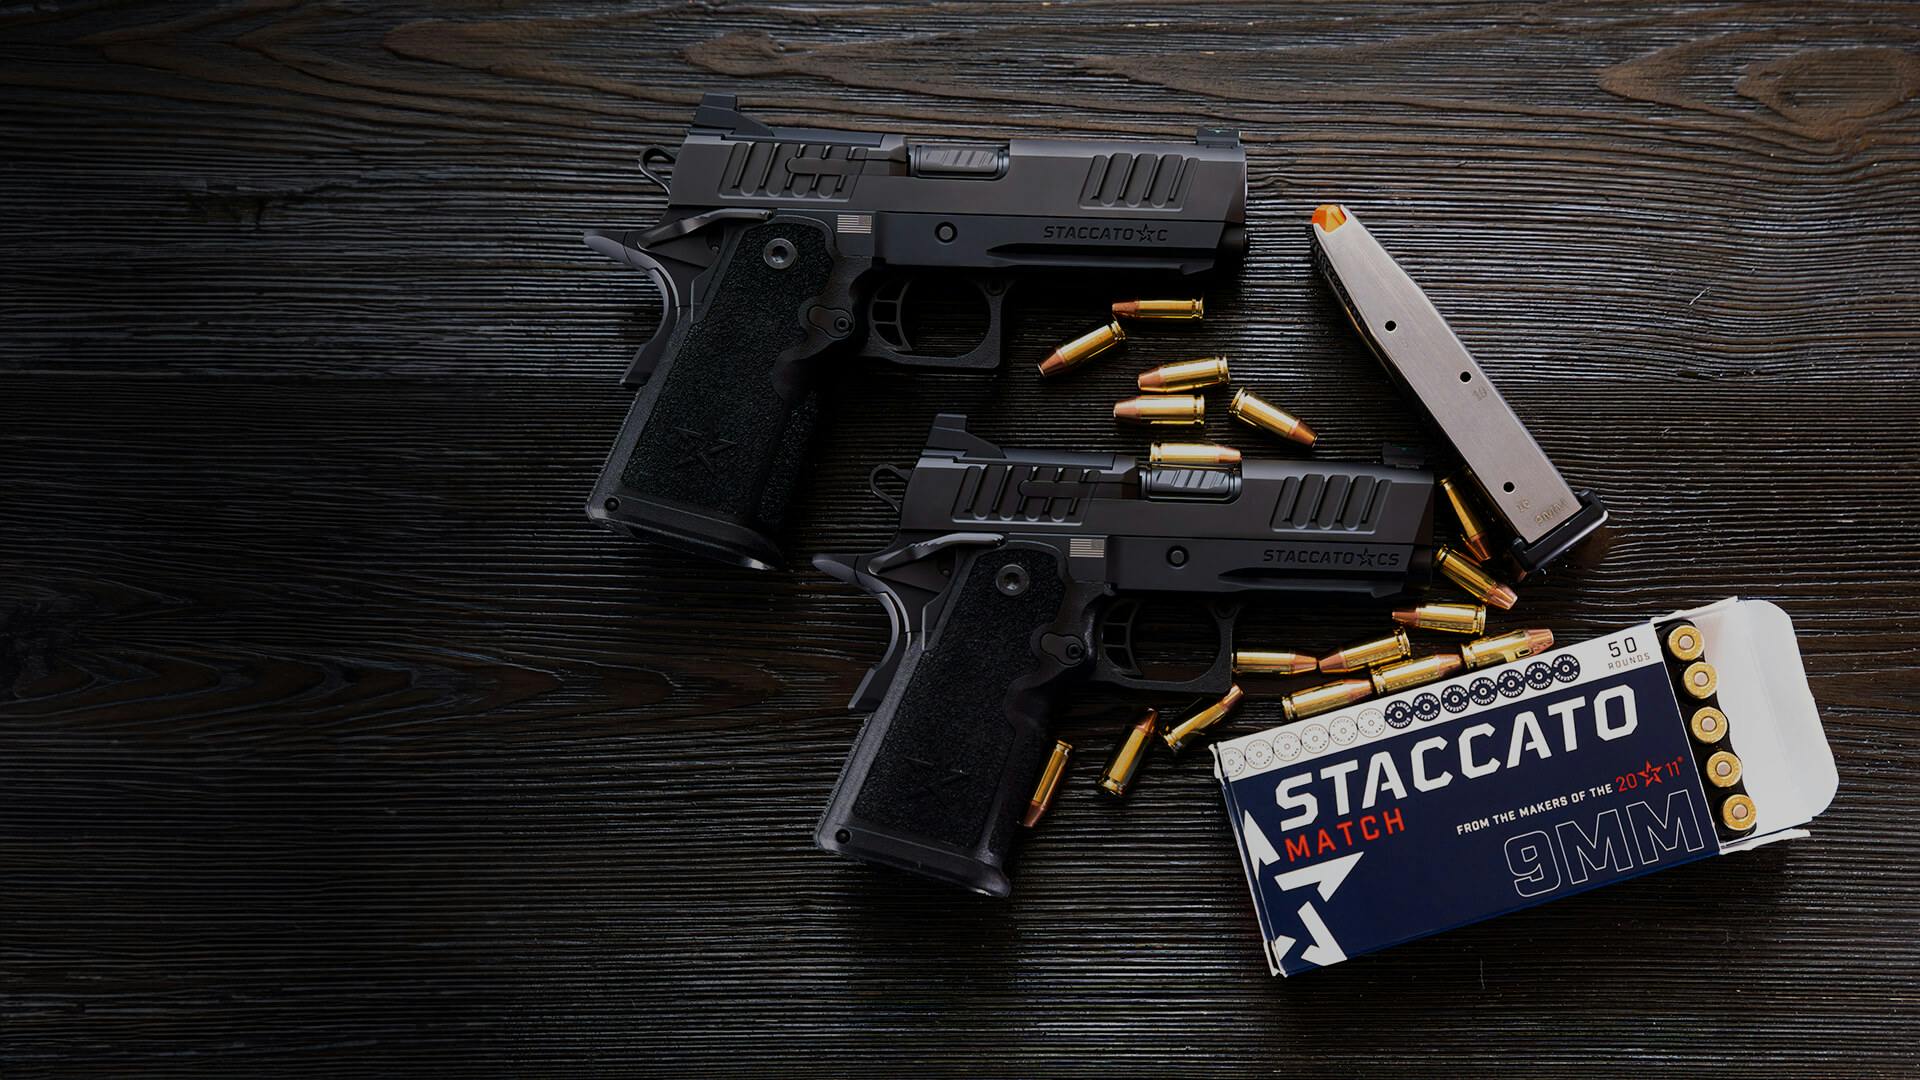 Staccato 2011 Handguns, Pistols, & Heroes. 2011 For - Accessories. Staccato Built